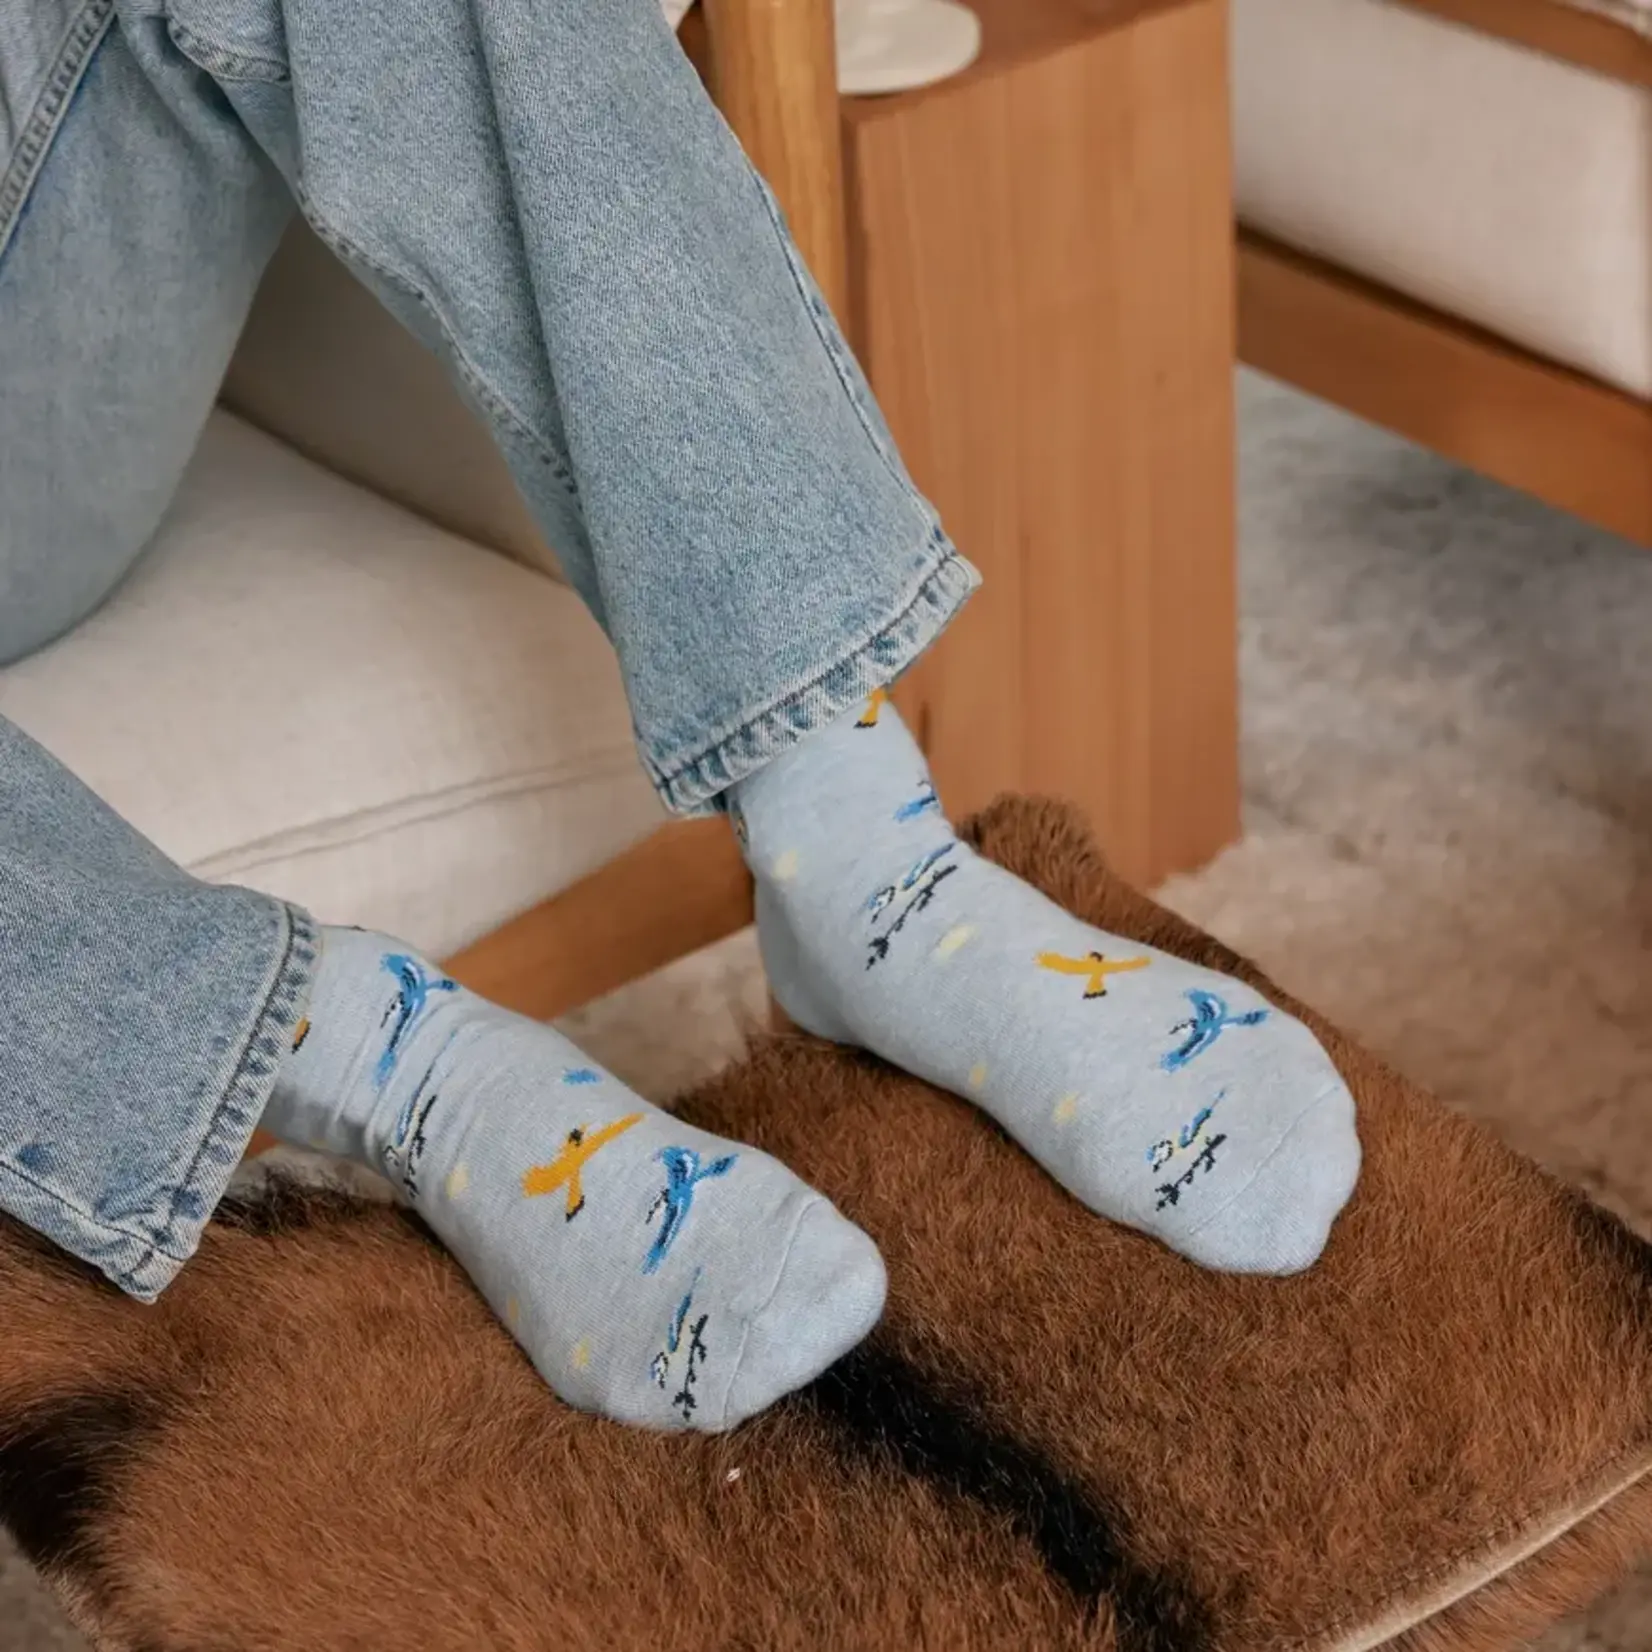 Socks that Protect Songbirds | Small